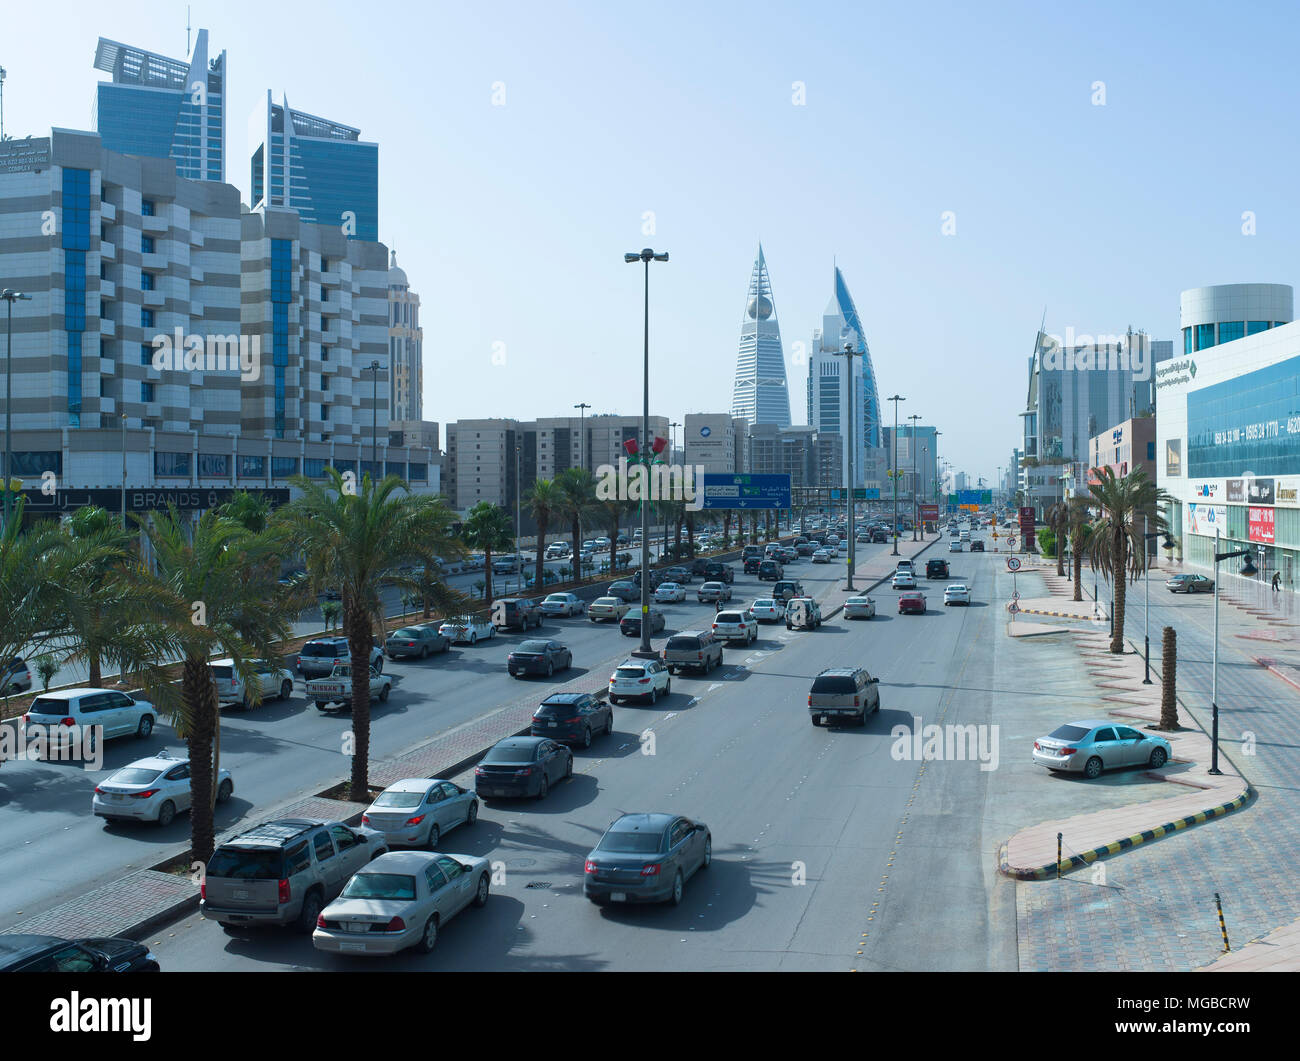 This April Only Around One Million Foreign Workers Have Left Saudi Arabia For Good, Which Explains This Light Traffic on King Fahad Road Early in The  Stock Photo